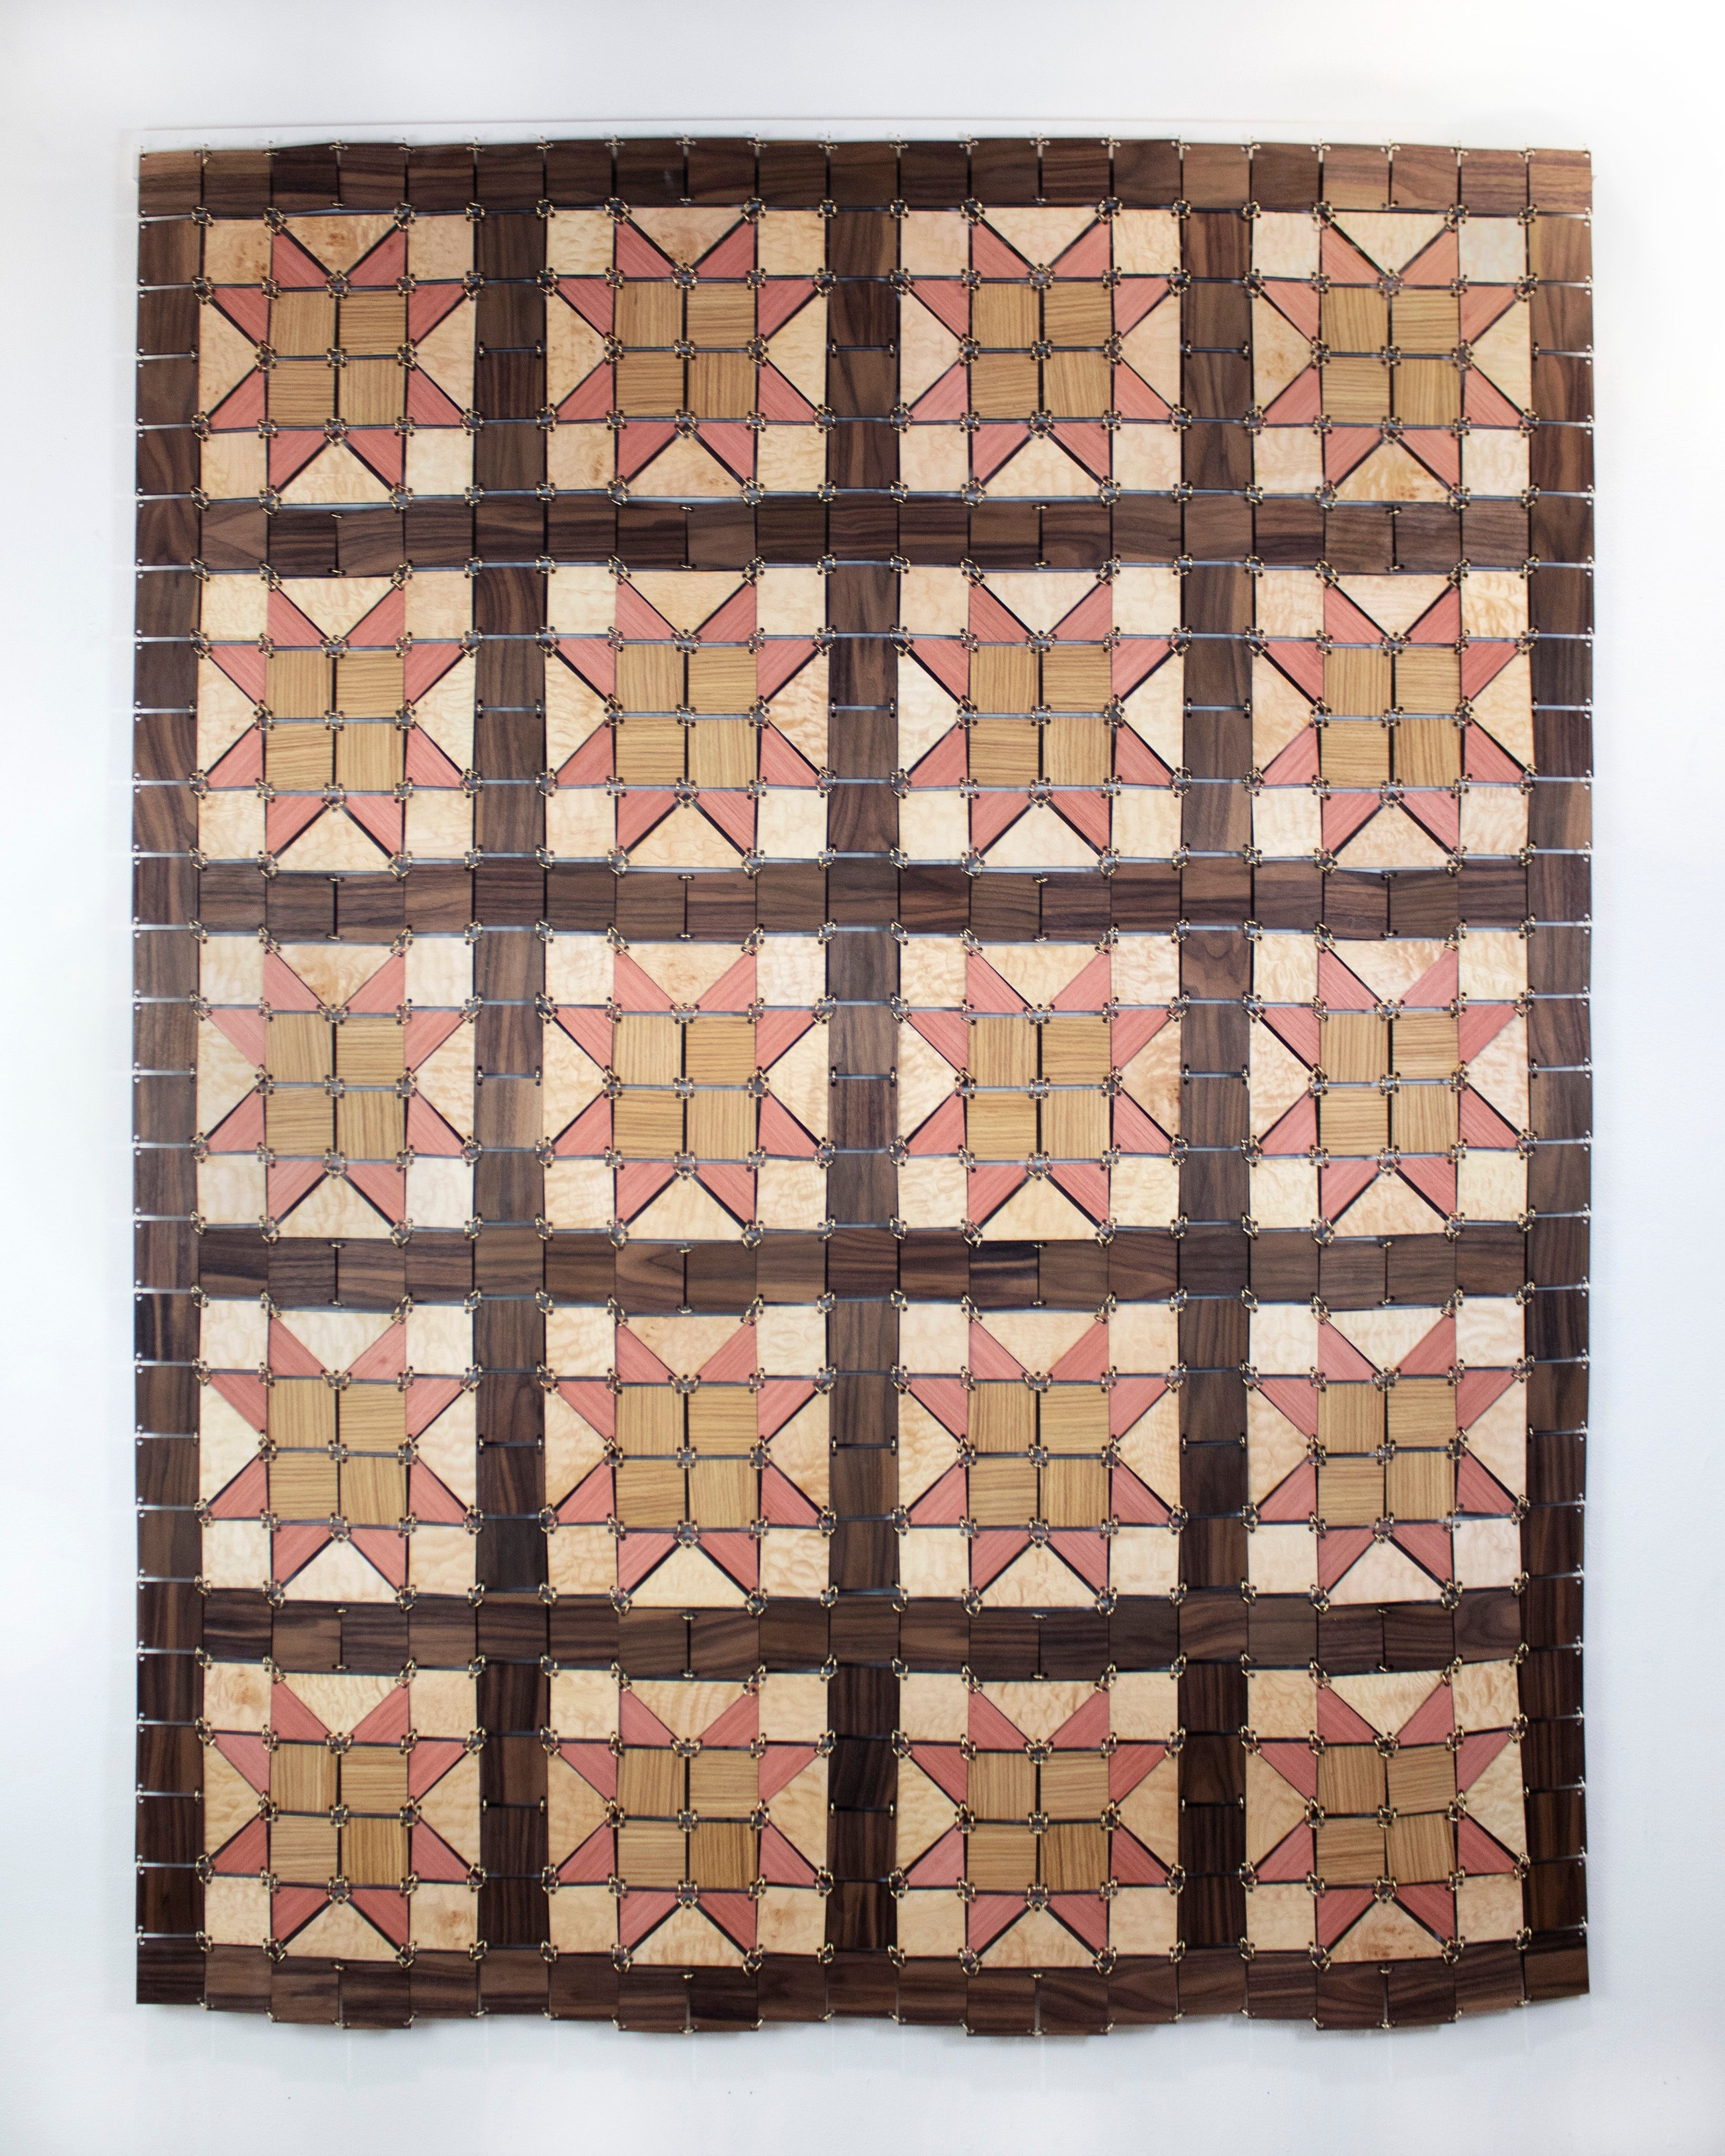 A quilt made from blocks of wood connected with brass jump rings.